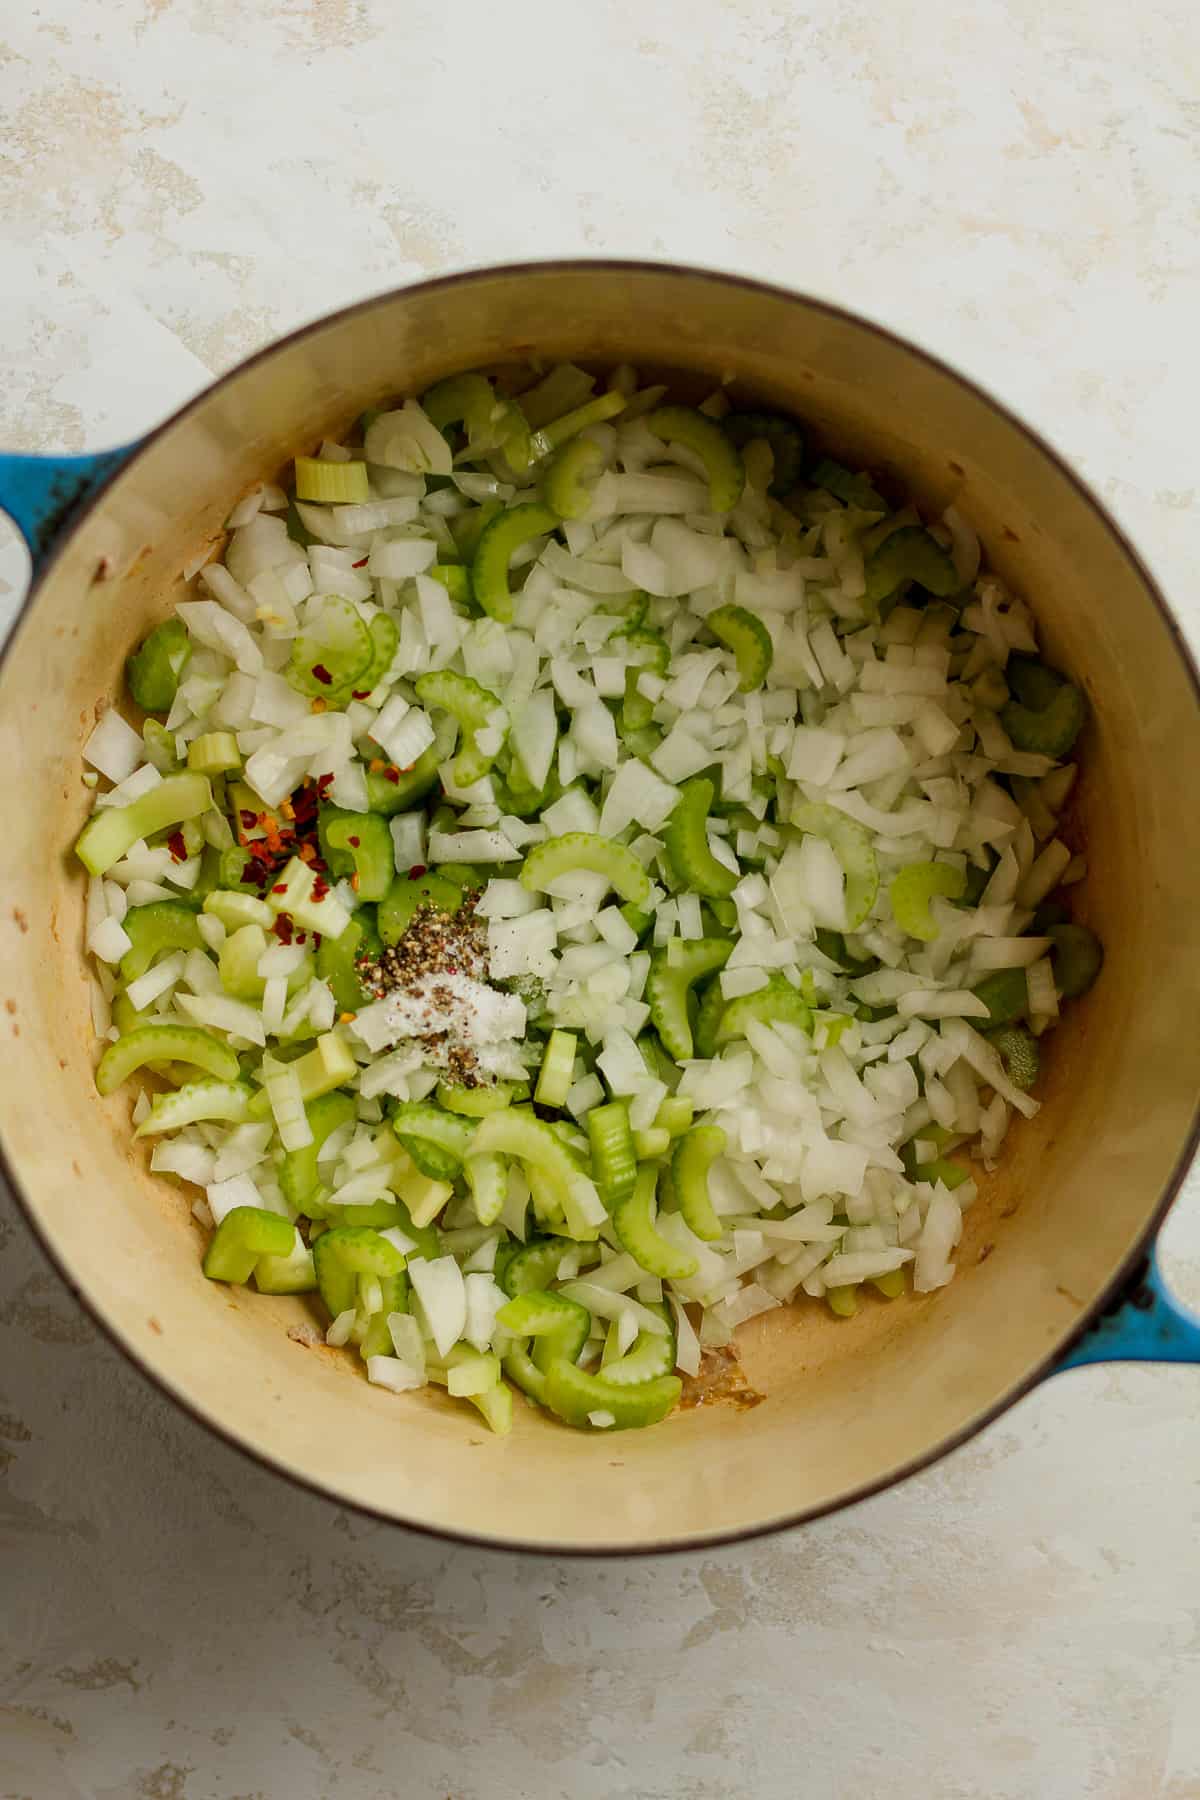 The onions and celery with the seasonings on top.